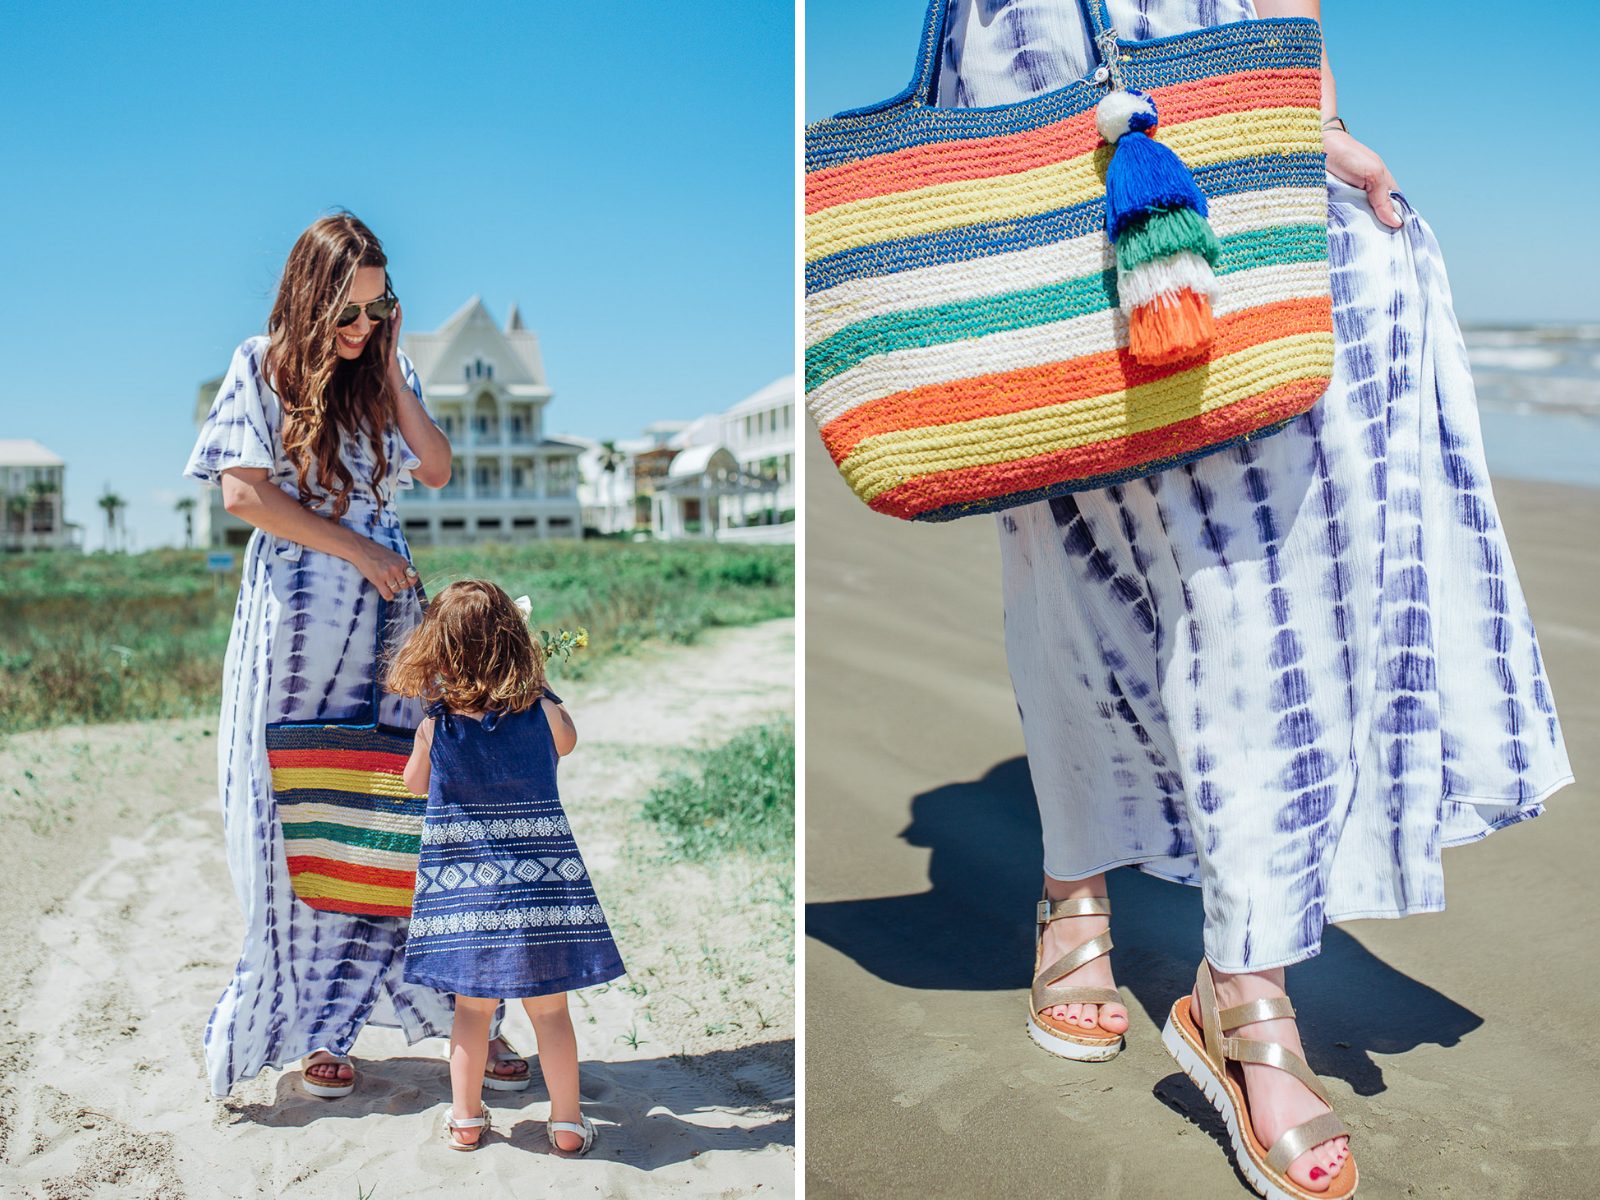 Francesca’s Sundress Outfits to wear for Mothers Day, featured by top US fashion blog, Lone Star Looking Glass: image of a woman wearing a Francesca’s tie dye maxi dress, platform sandals and a striped tote